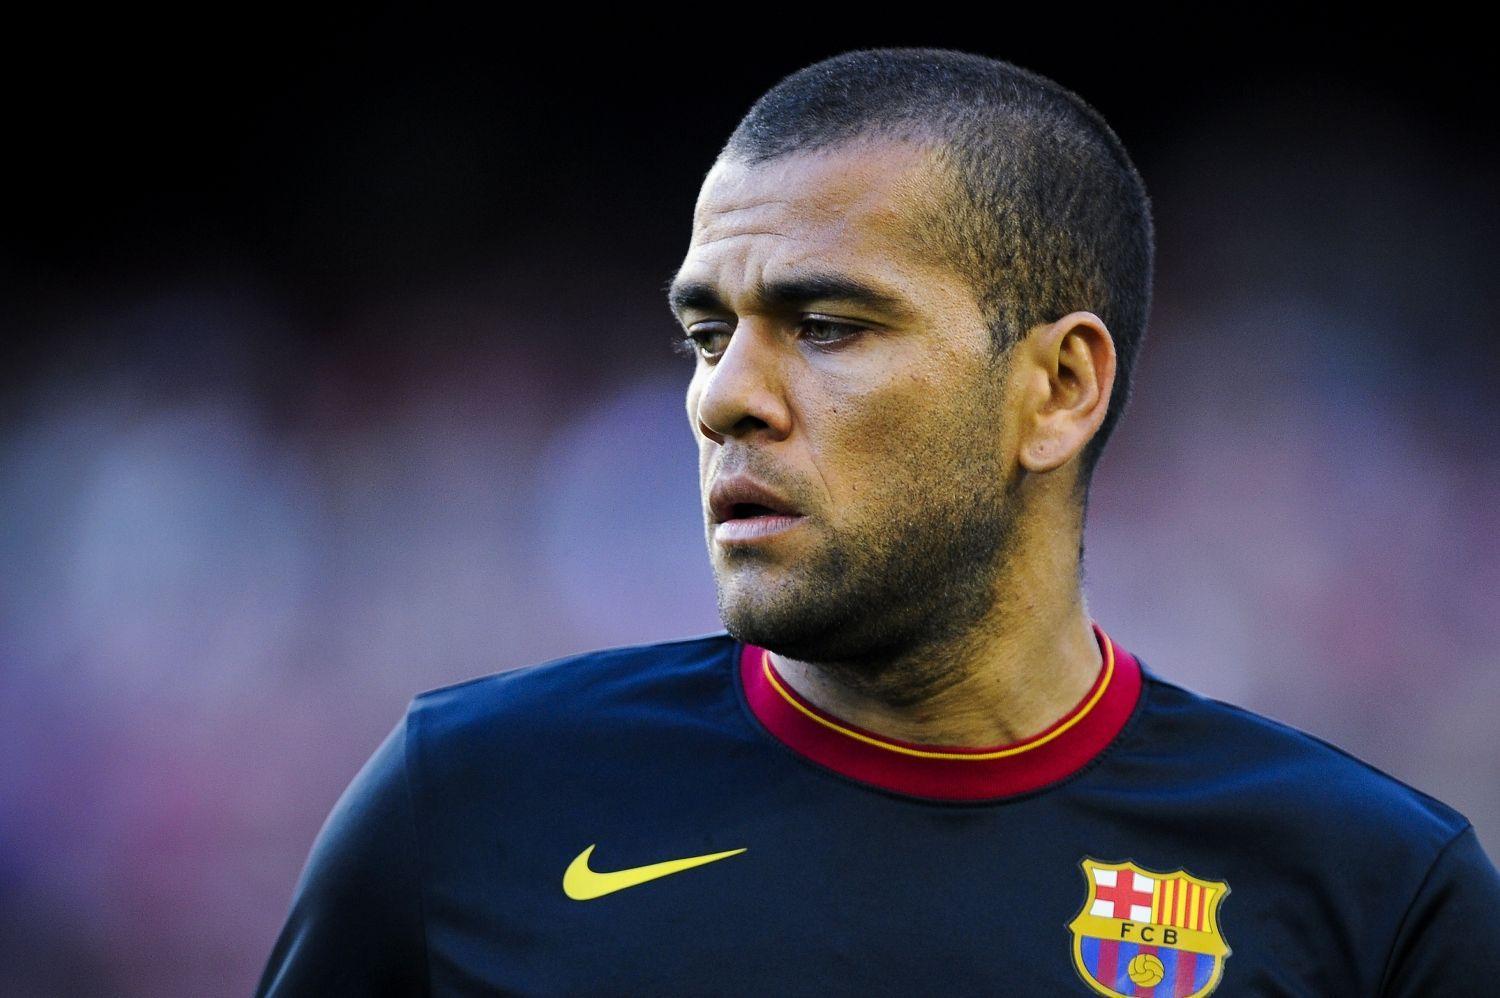 Download Free Modern Dani Alves The Wallpapers 590x350px.